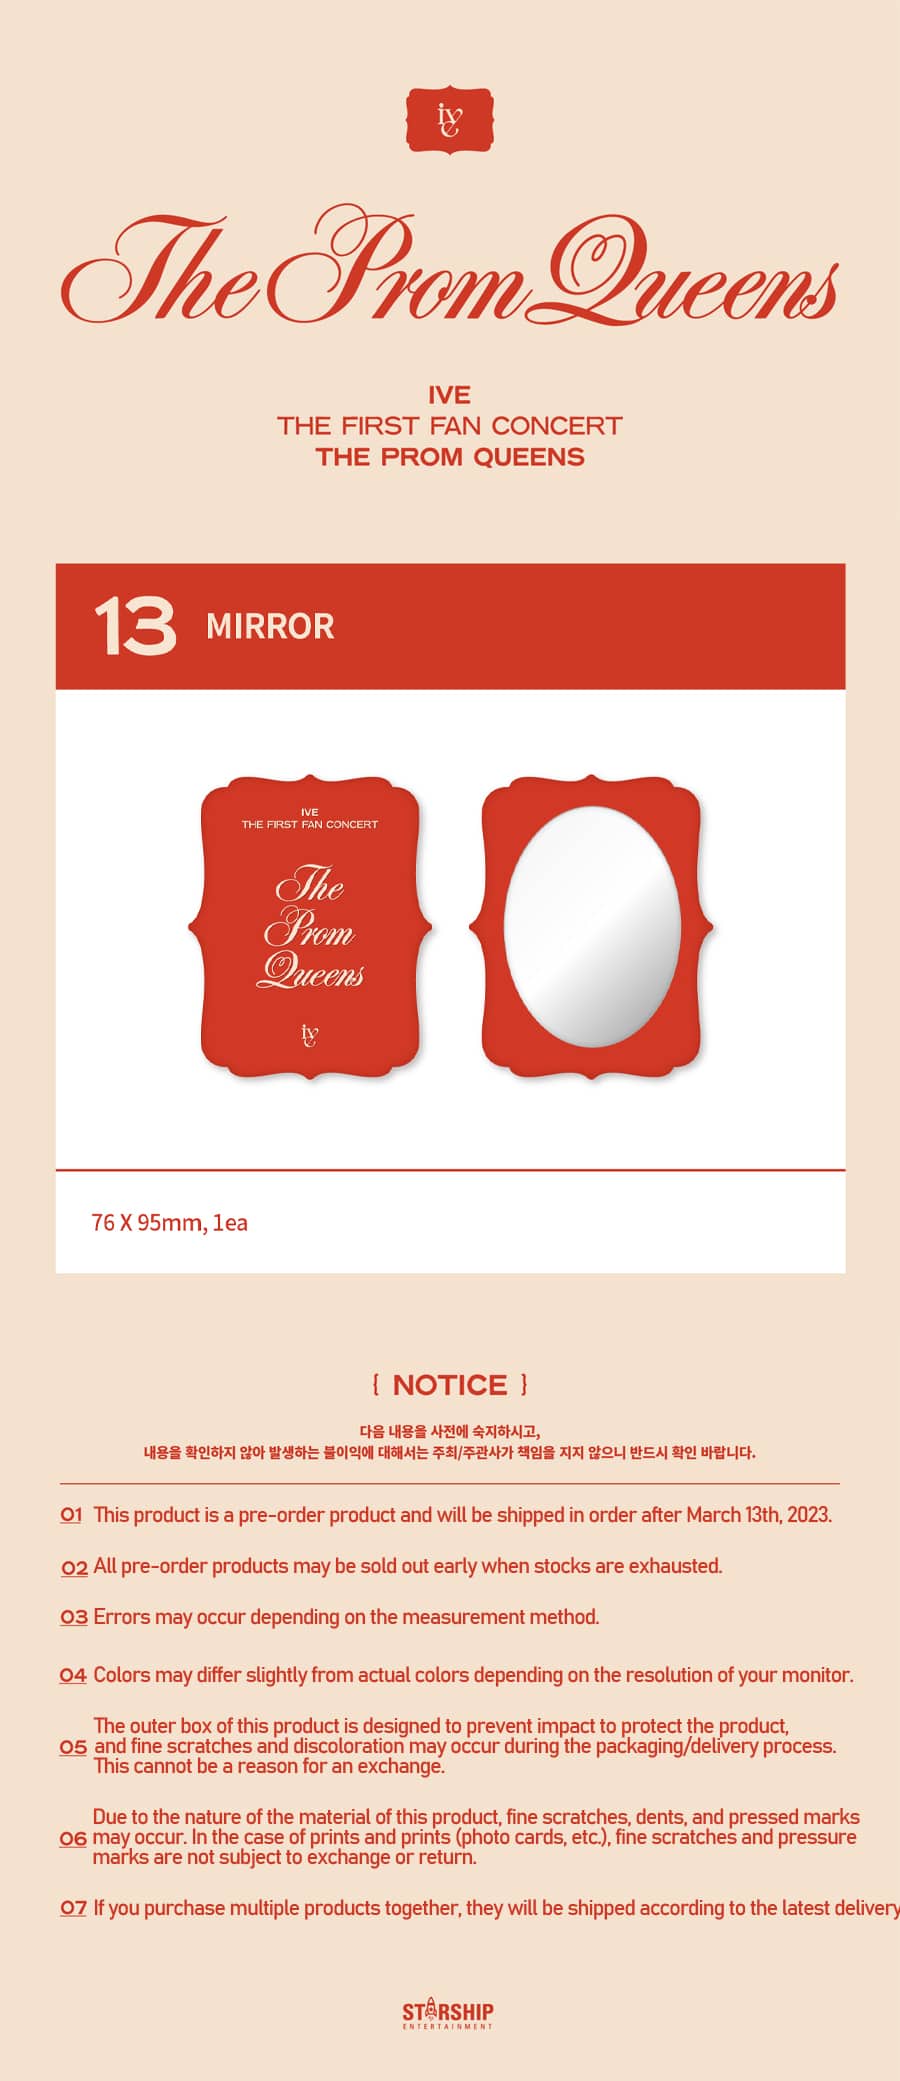 ive-the-prom-queens-mirror-wholesale